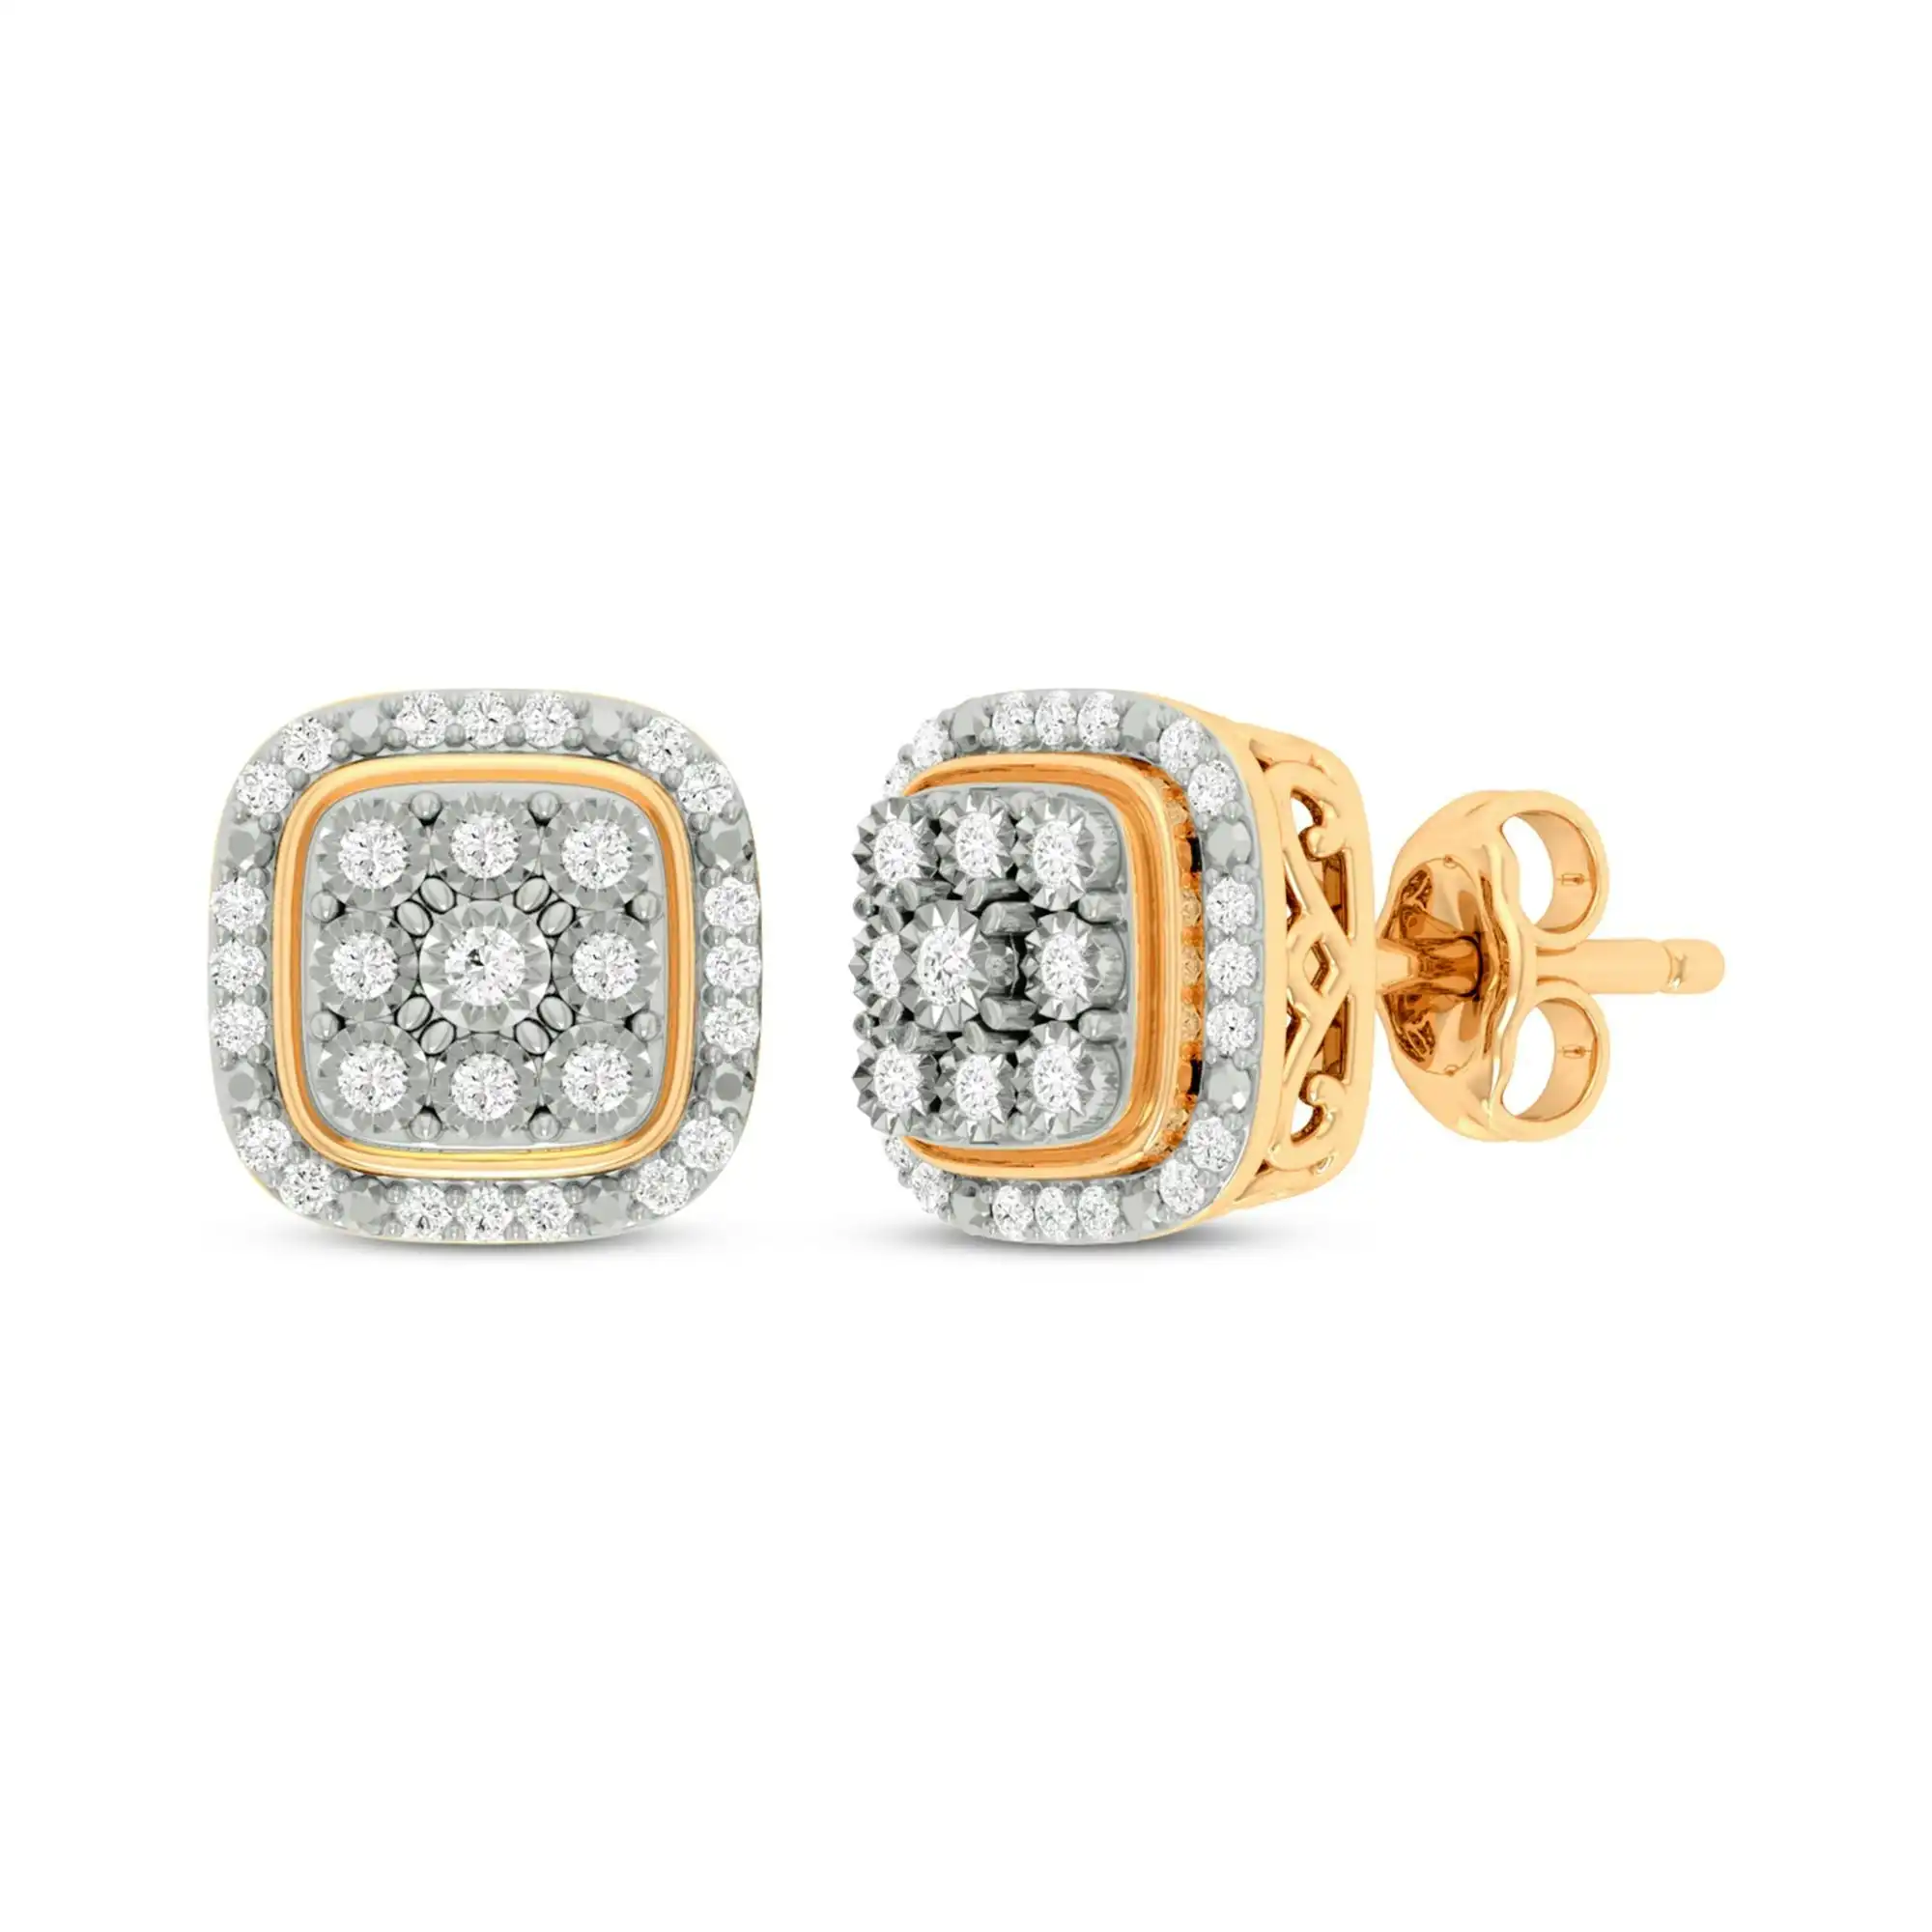 Meera Miracle Bezel Earrings with 1/5ct of Laboratory Grown Diamonds in 9ct Yellow Gold